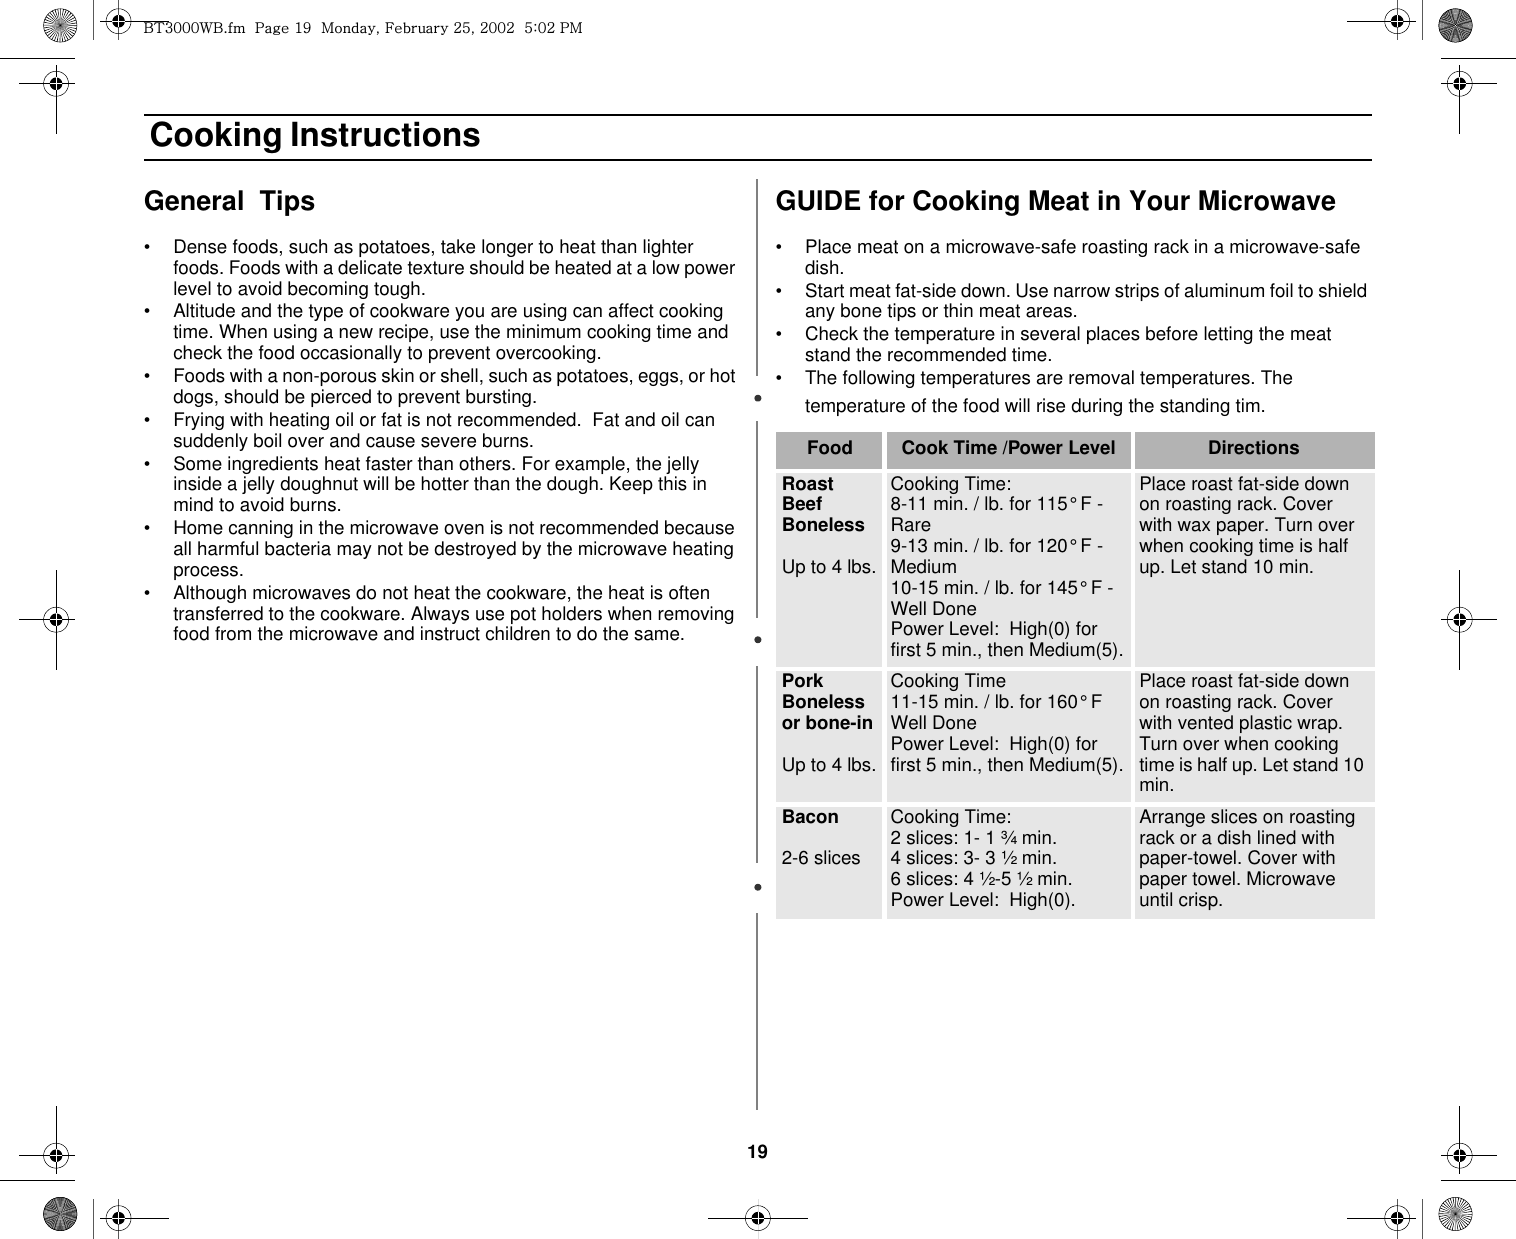 19 Cooking InstructionsGeneral  Tips • Dense foods, such as potatoes, take longer to heat than lighter foods. Foods with a delicate texture should be heated at a low power level to avoid becoming tough.• Altitude and the type of cookware you are using can affect cooking time. When using a new recipe, use the minimum cooking time and check the food occasionally to prevent overcooking.• Foods with a non-porous skin or shell, such as potatoes, eggs, or hot dogs, should be pierced to prevent bursting.• Frying with heating oil or fat is not recommended.  Fat and oil can suddenly boil over and cause severe burns.• Some ingredients heat faster than others. For example, the jelly inside a jelly doughnut will be hotter than the dough. Keep this in mind to avoid burns.• Home canning in the microwave oven is not recommended because all harmful bacteria may not be destroyed by the microwave heating process.• Although microwaves do not heat the cookware, the heat is often transferred to the cookware. Always use pot holders when removing food from the microwave and instruct children to do the same.GUIDE for Cooking Meat in Your Microwave• Place meat on a microwave-safe roasting rack in a microwave-safe dish.• Start meat fat-side down. Use narrow strips of aluminum foil to shield any bone tips or thin meat areas.• Check the temperature in several places before letting the meat stand the recommended time.• The following temperatures are removal temperatures. The temperature of the food will rise during the standing tim.Food Cook Time /Power Level DirectionsRoast Beef BonelessUp to 4 lbs.Cooking Time:8-11 min. / lb. for 115° F - Rare 9-13 min. / lb. for 120° F - Medium10-15 min. / lb. for 145° F - Well DonePower Level:  High(0) for first 5 min., then Medium(5).Place roast fat-side down on roasting rack. Cover with wax paper. Turn over when cooking time is half up. Let stand 10 min.Pork Boneless or bone-inUp to 4 lbs.Cooking Time11-15 min. / lb. for 160° F Well Done Power Level:  High(0) for first 5 min., then Medium(5).Place roast fat-side down on roasting rack. Cover with vented plastic wrap. Turn over when cooking time is half up. Let stand 10 min.Bacon 2-6 slicesCooking Time:  2 slices: 1- 1 ¾ min.4 slices: 3- 3 ½ min.6 slices: 4 ½-5 ½ min.Power Level:  High(0).Arrange slices on roasting rack or a dish lined with paper-towel. Cover with paper towel. Microwave until crisp.i{ZWWW~iUGGwGX`GGtSGmGY\SGYWWYGG\aWYGwt